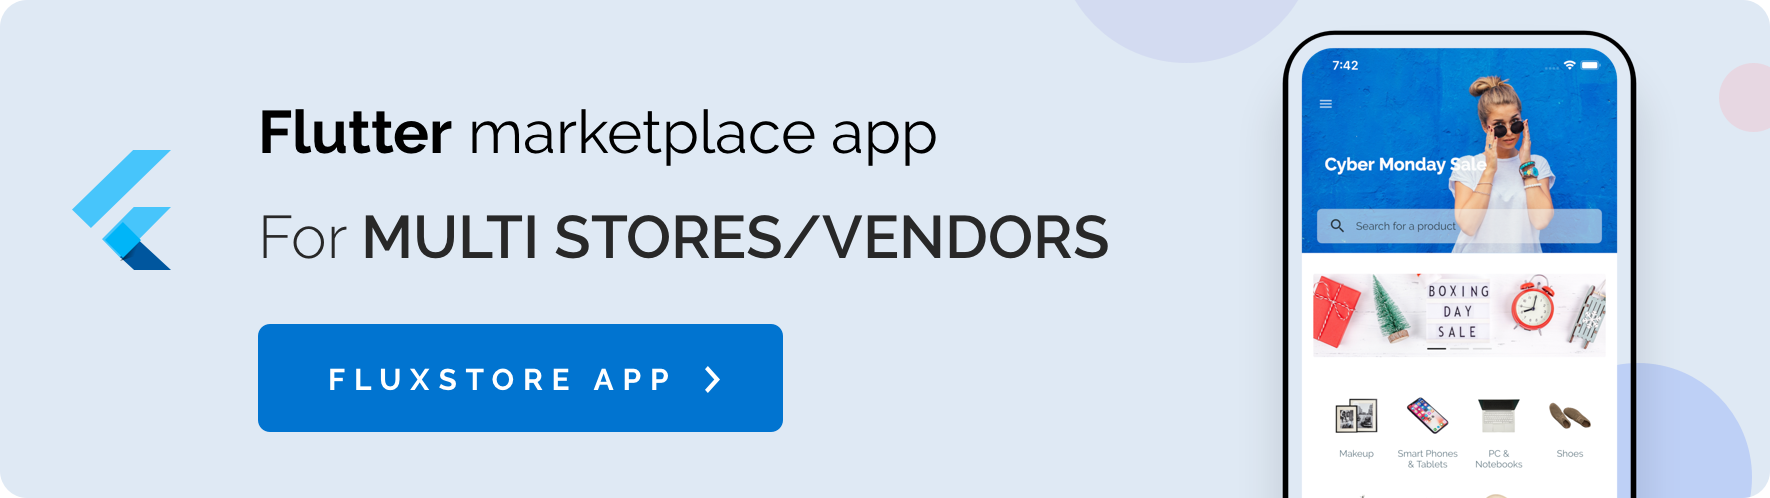 MStore Multi Vendor - Complete React Native template for WooCommerce - 24